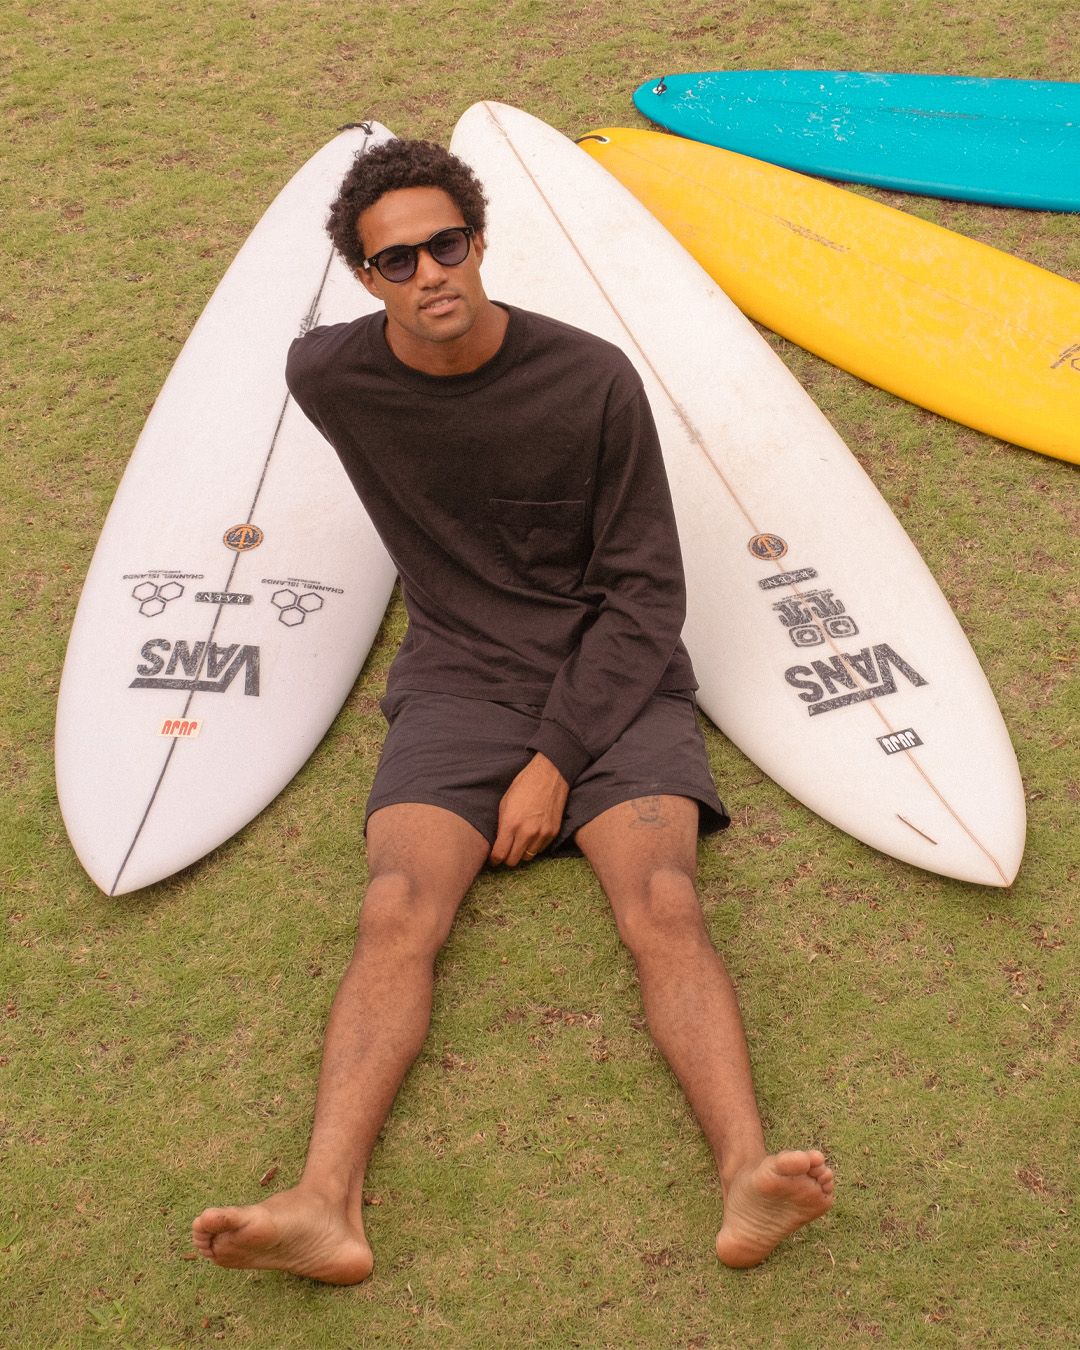 A person sitting on the grass with surfboards propped up behind them.